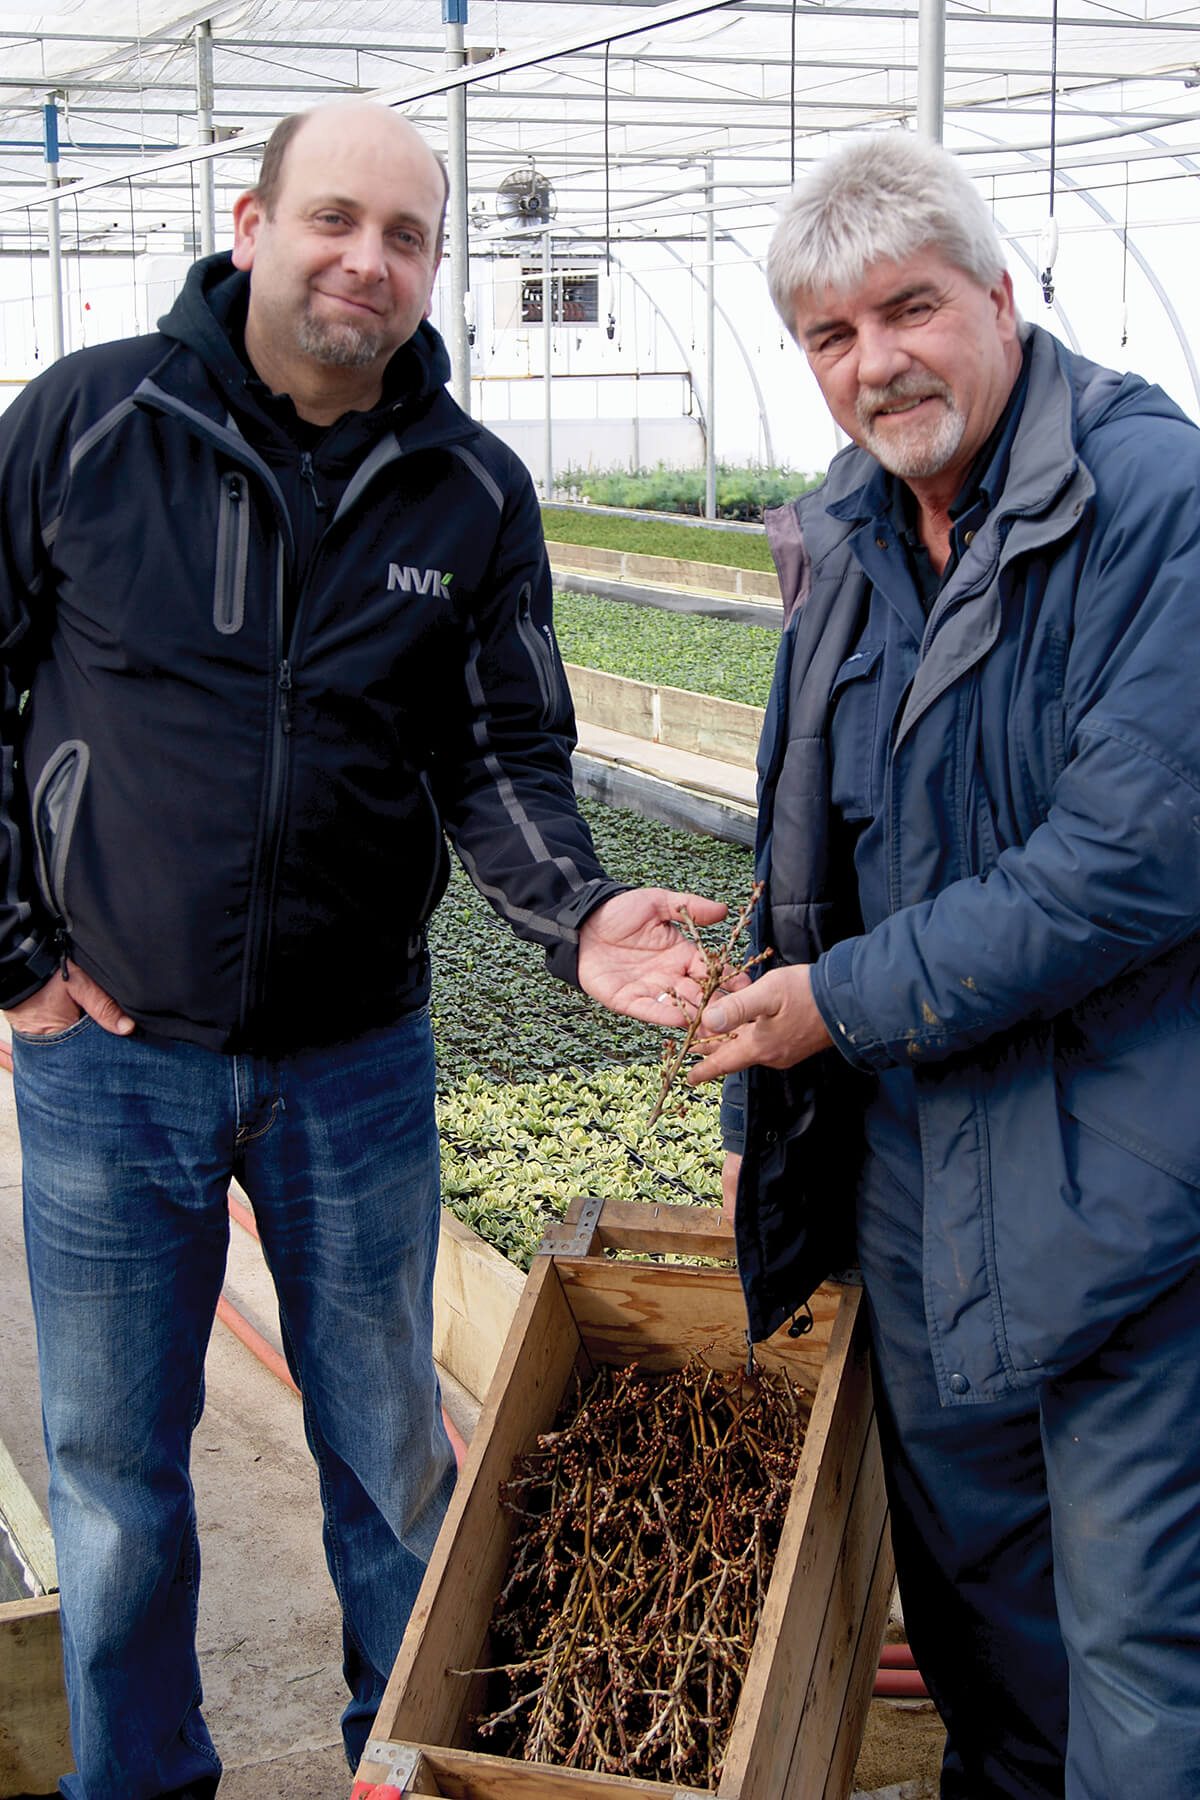 two men in a greenhouse wiht a crate of tree seedlings